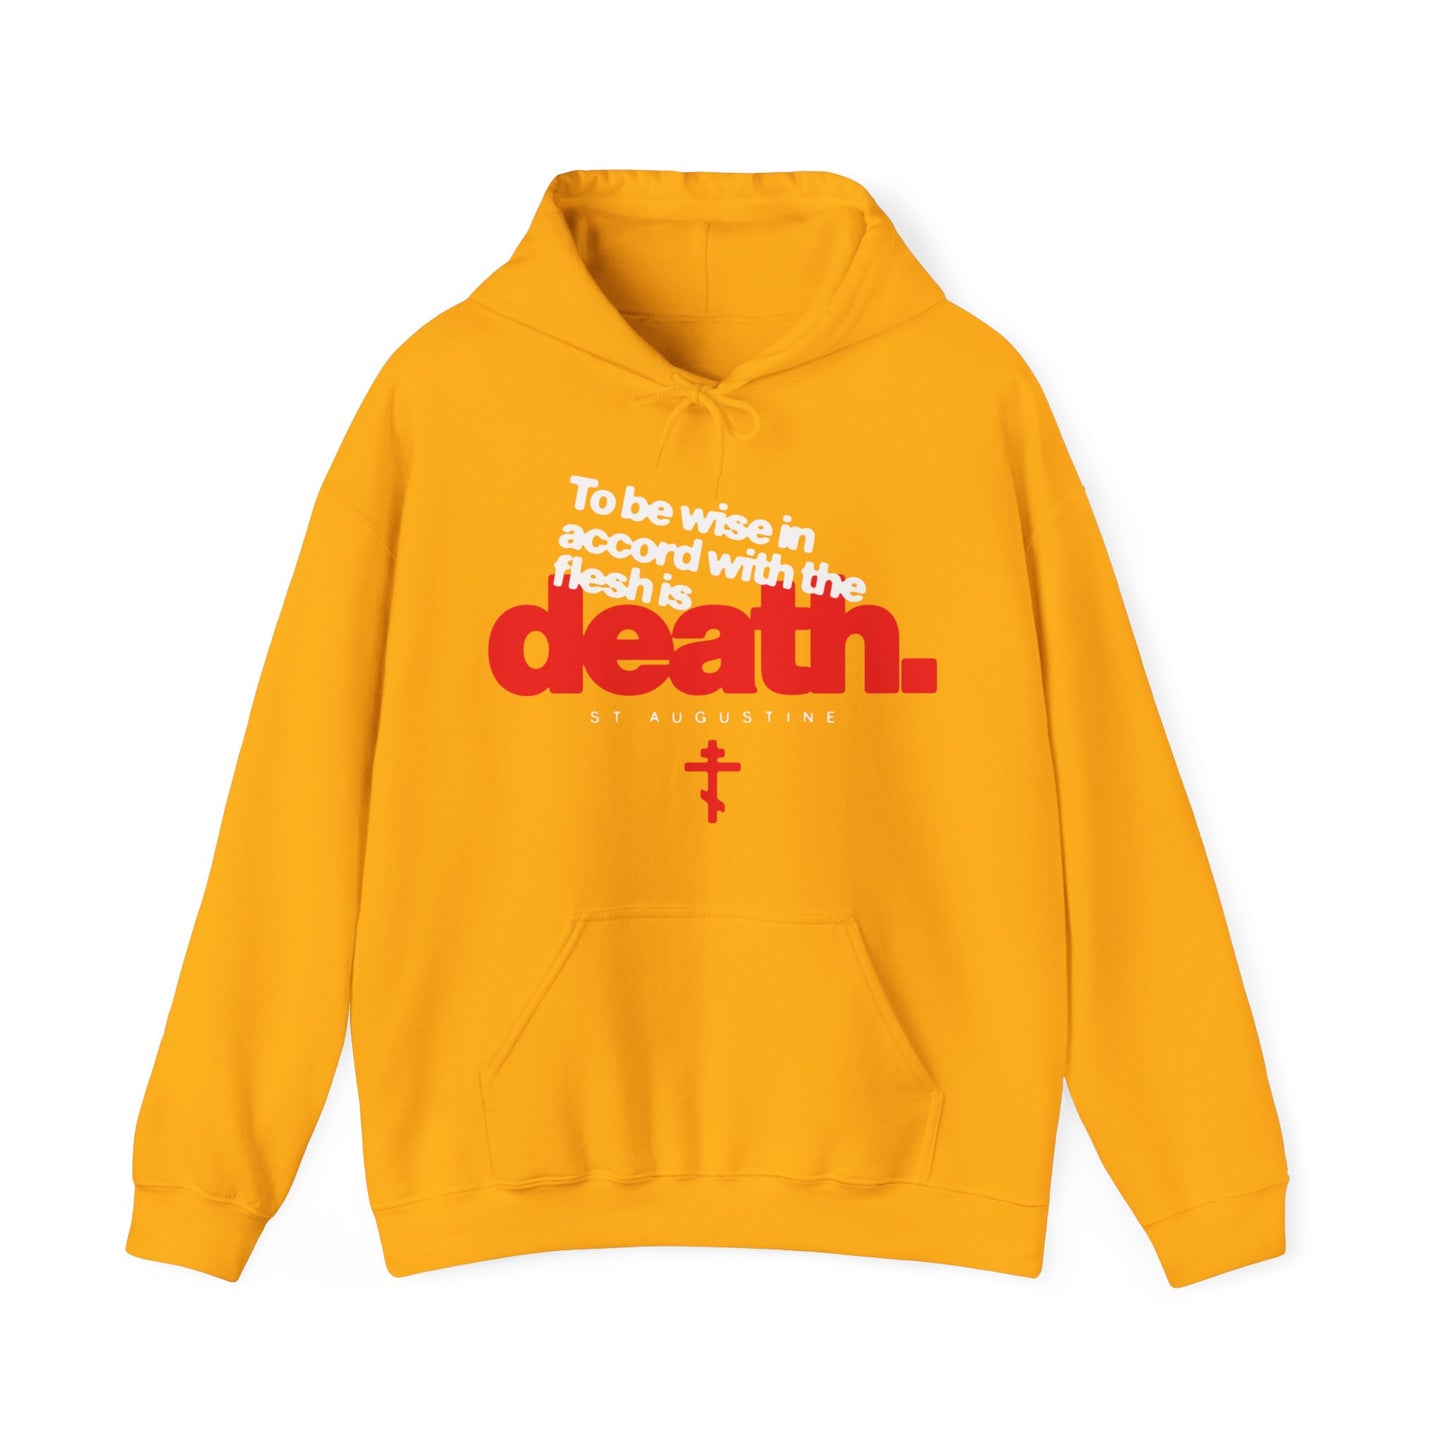 To Be Wise In Accord With the Flesh is Death (St Augustine) No. 1 | Orthodox Christian Hoodie / Hooded Sweatshirt